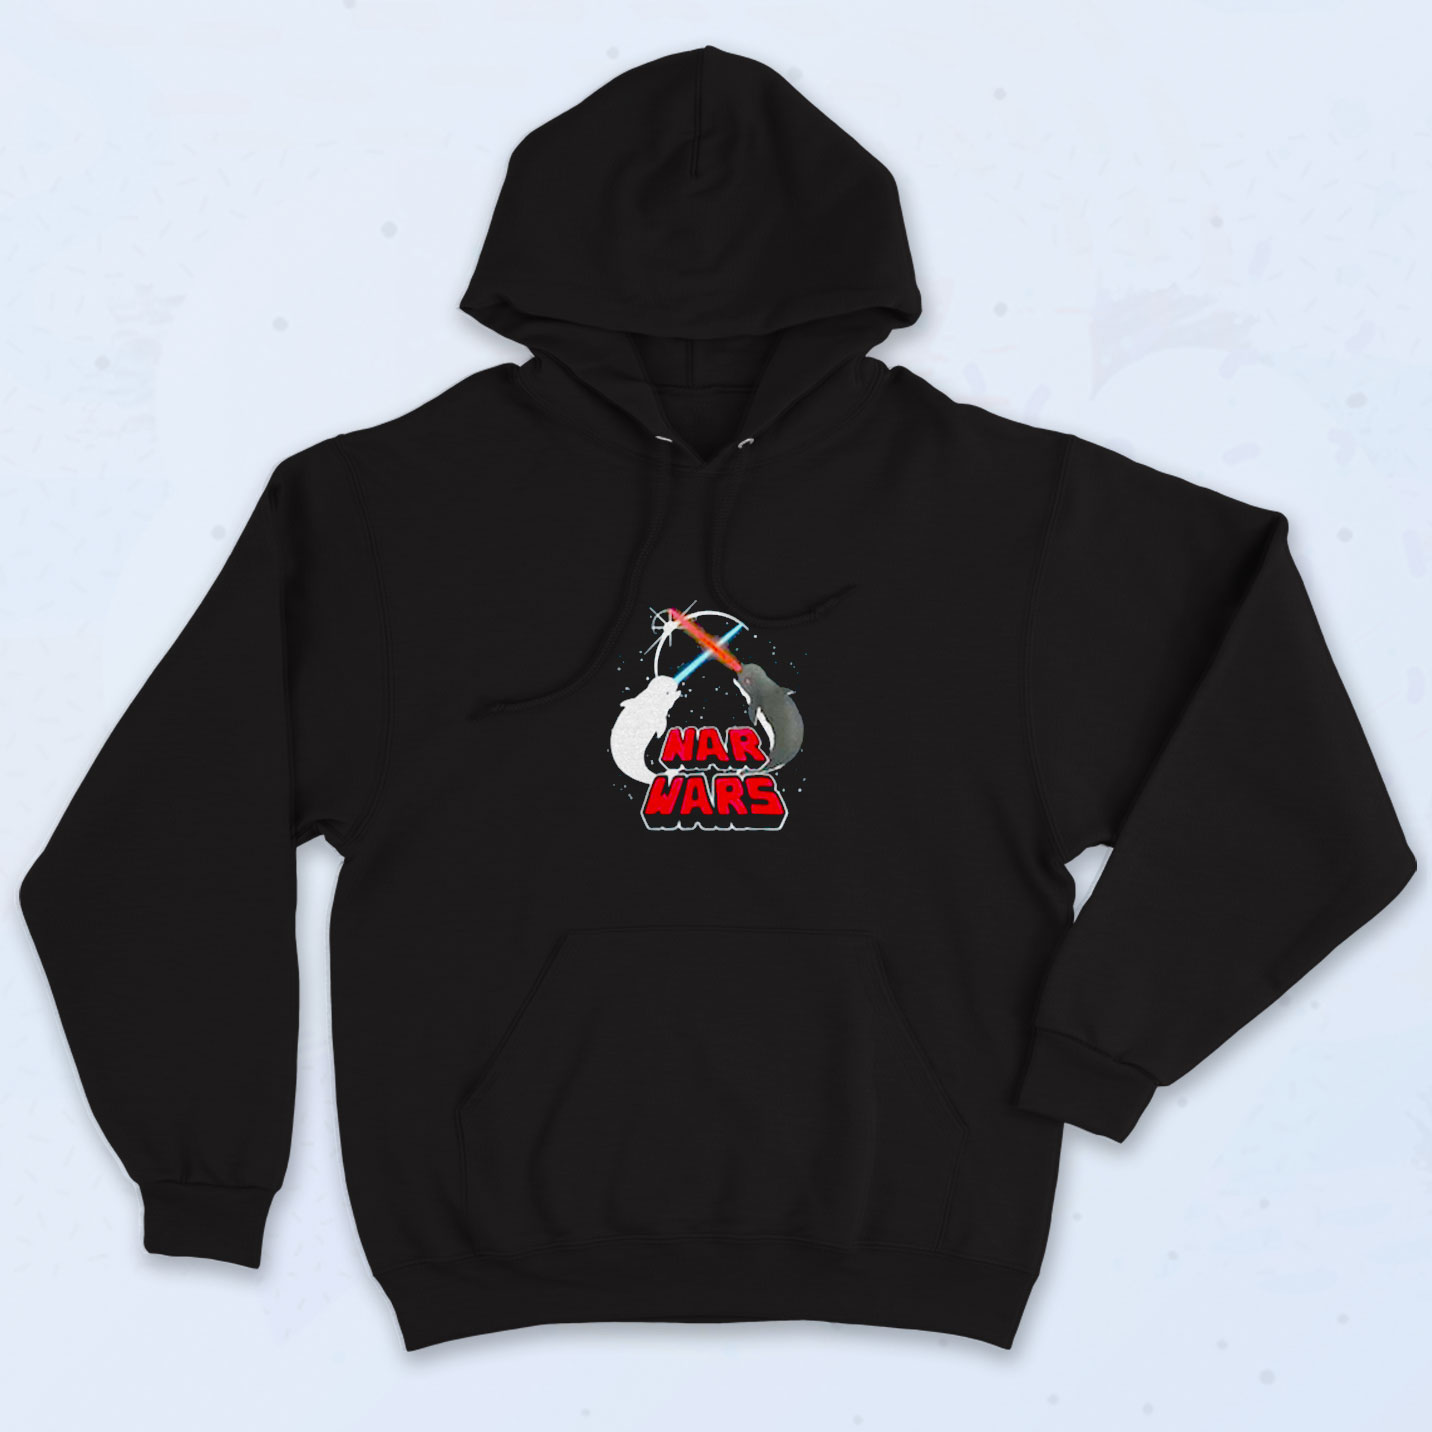 Nar Wars Parody Funny Narwhals Lover Aesthetic Hoodie - 90sclothes.com